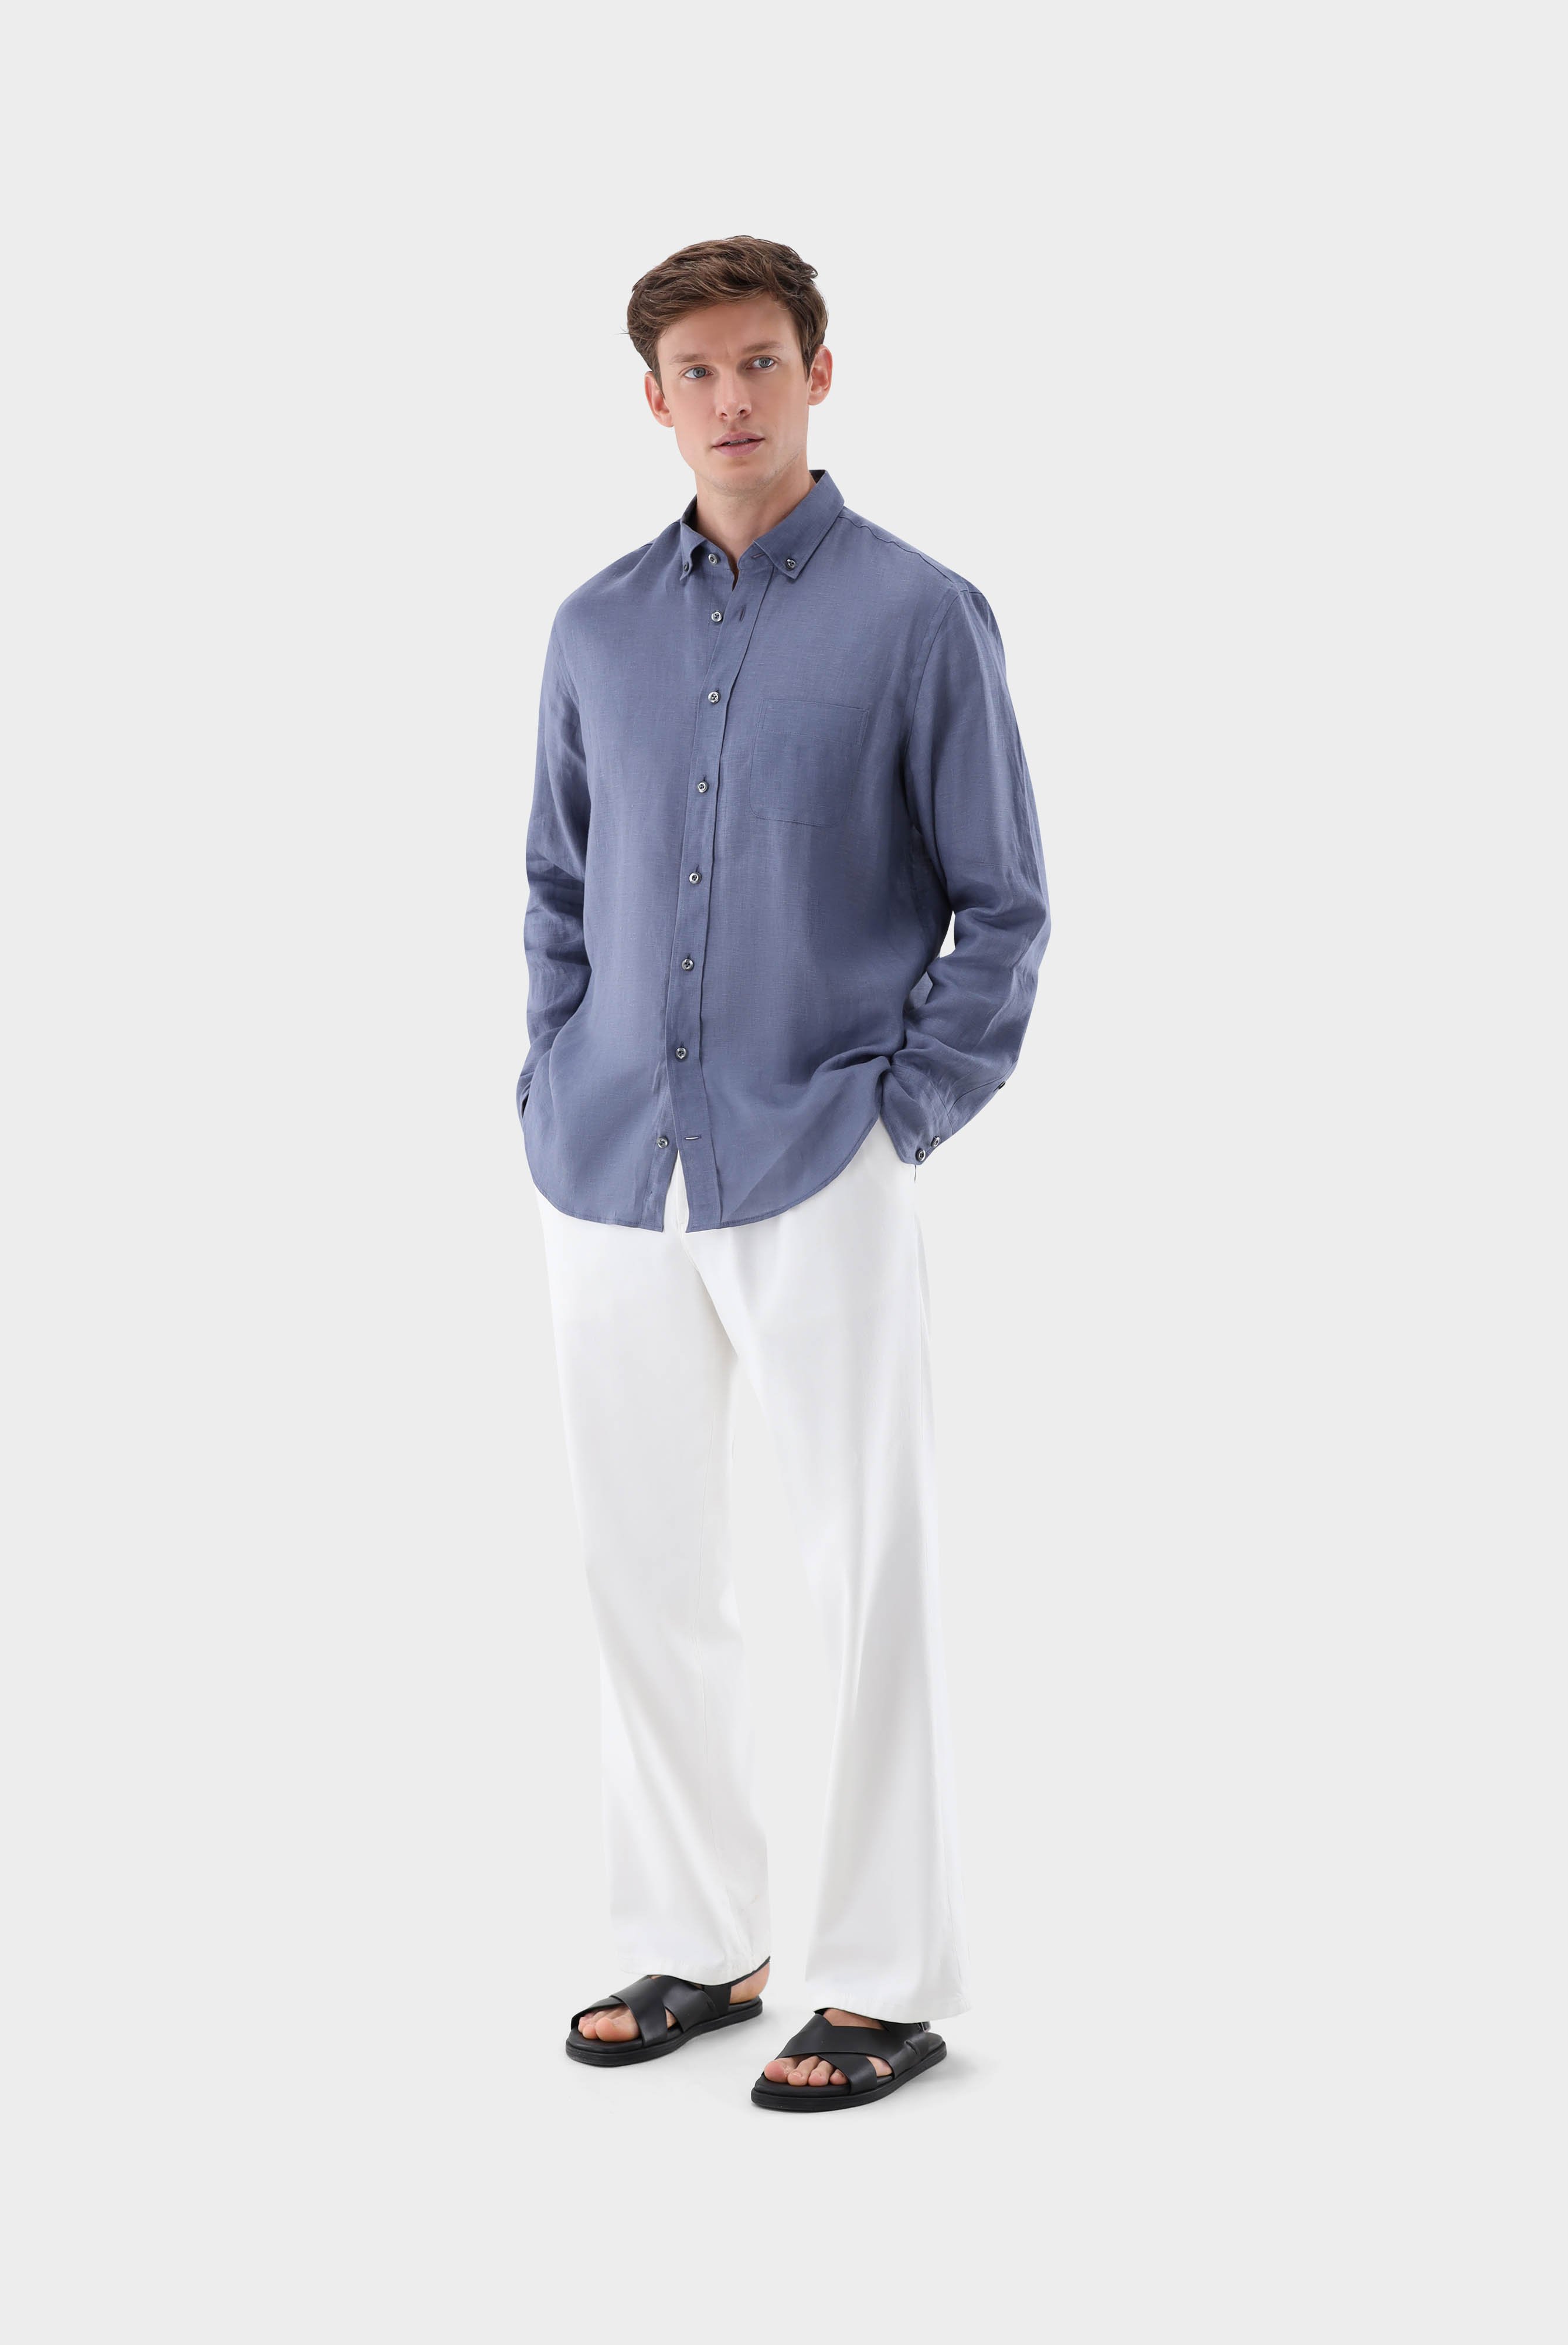 Casual Shirts+Linen Button-Down Collar Shirt Tailor Fit+20.2013.9V.150555.680.38